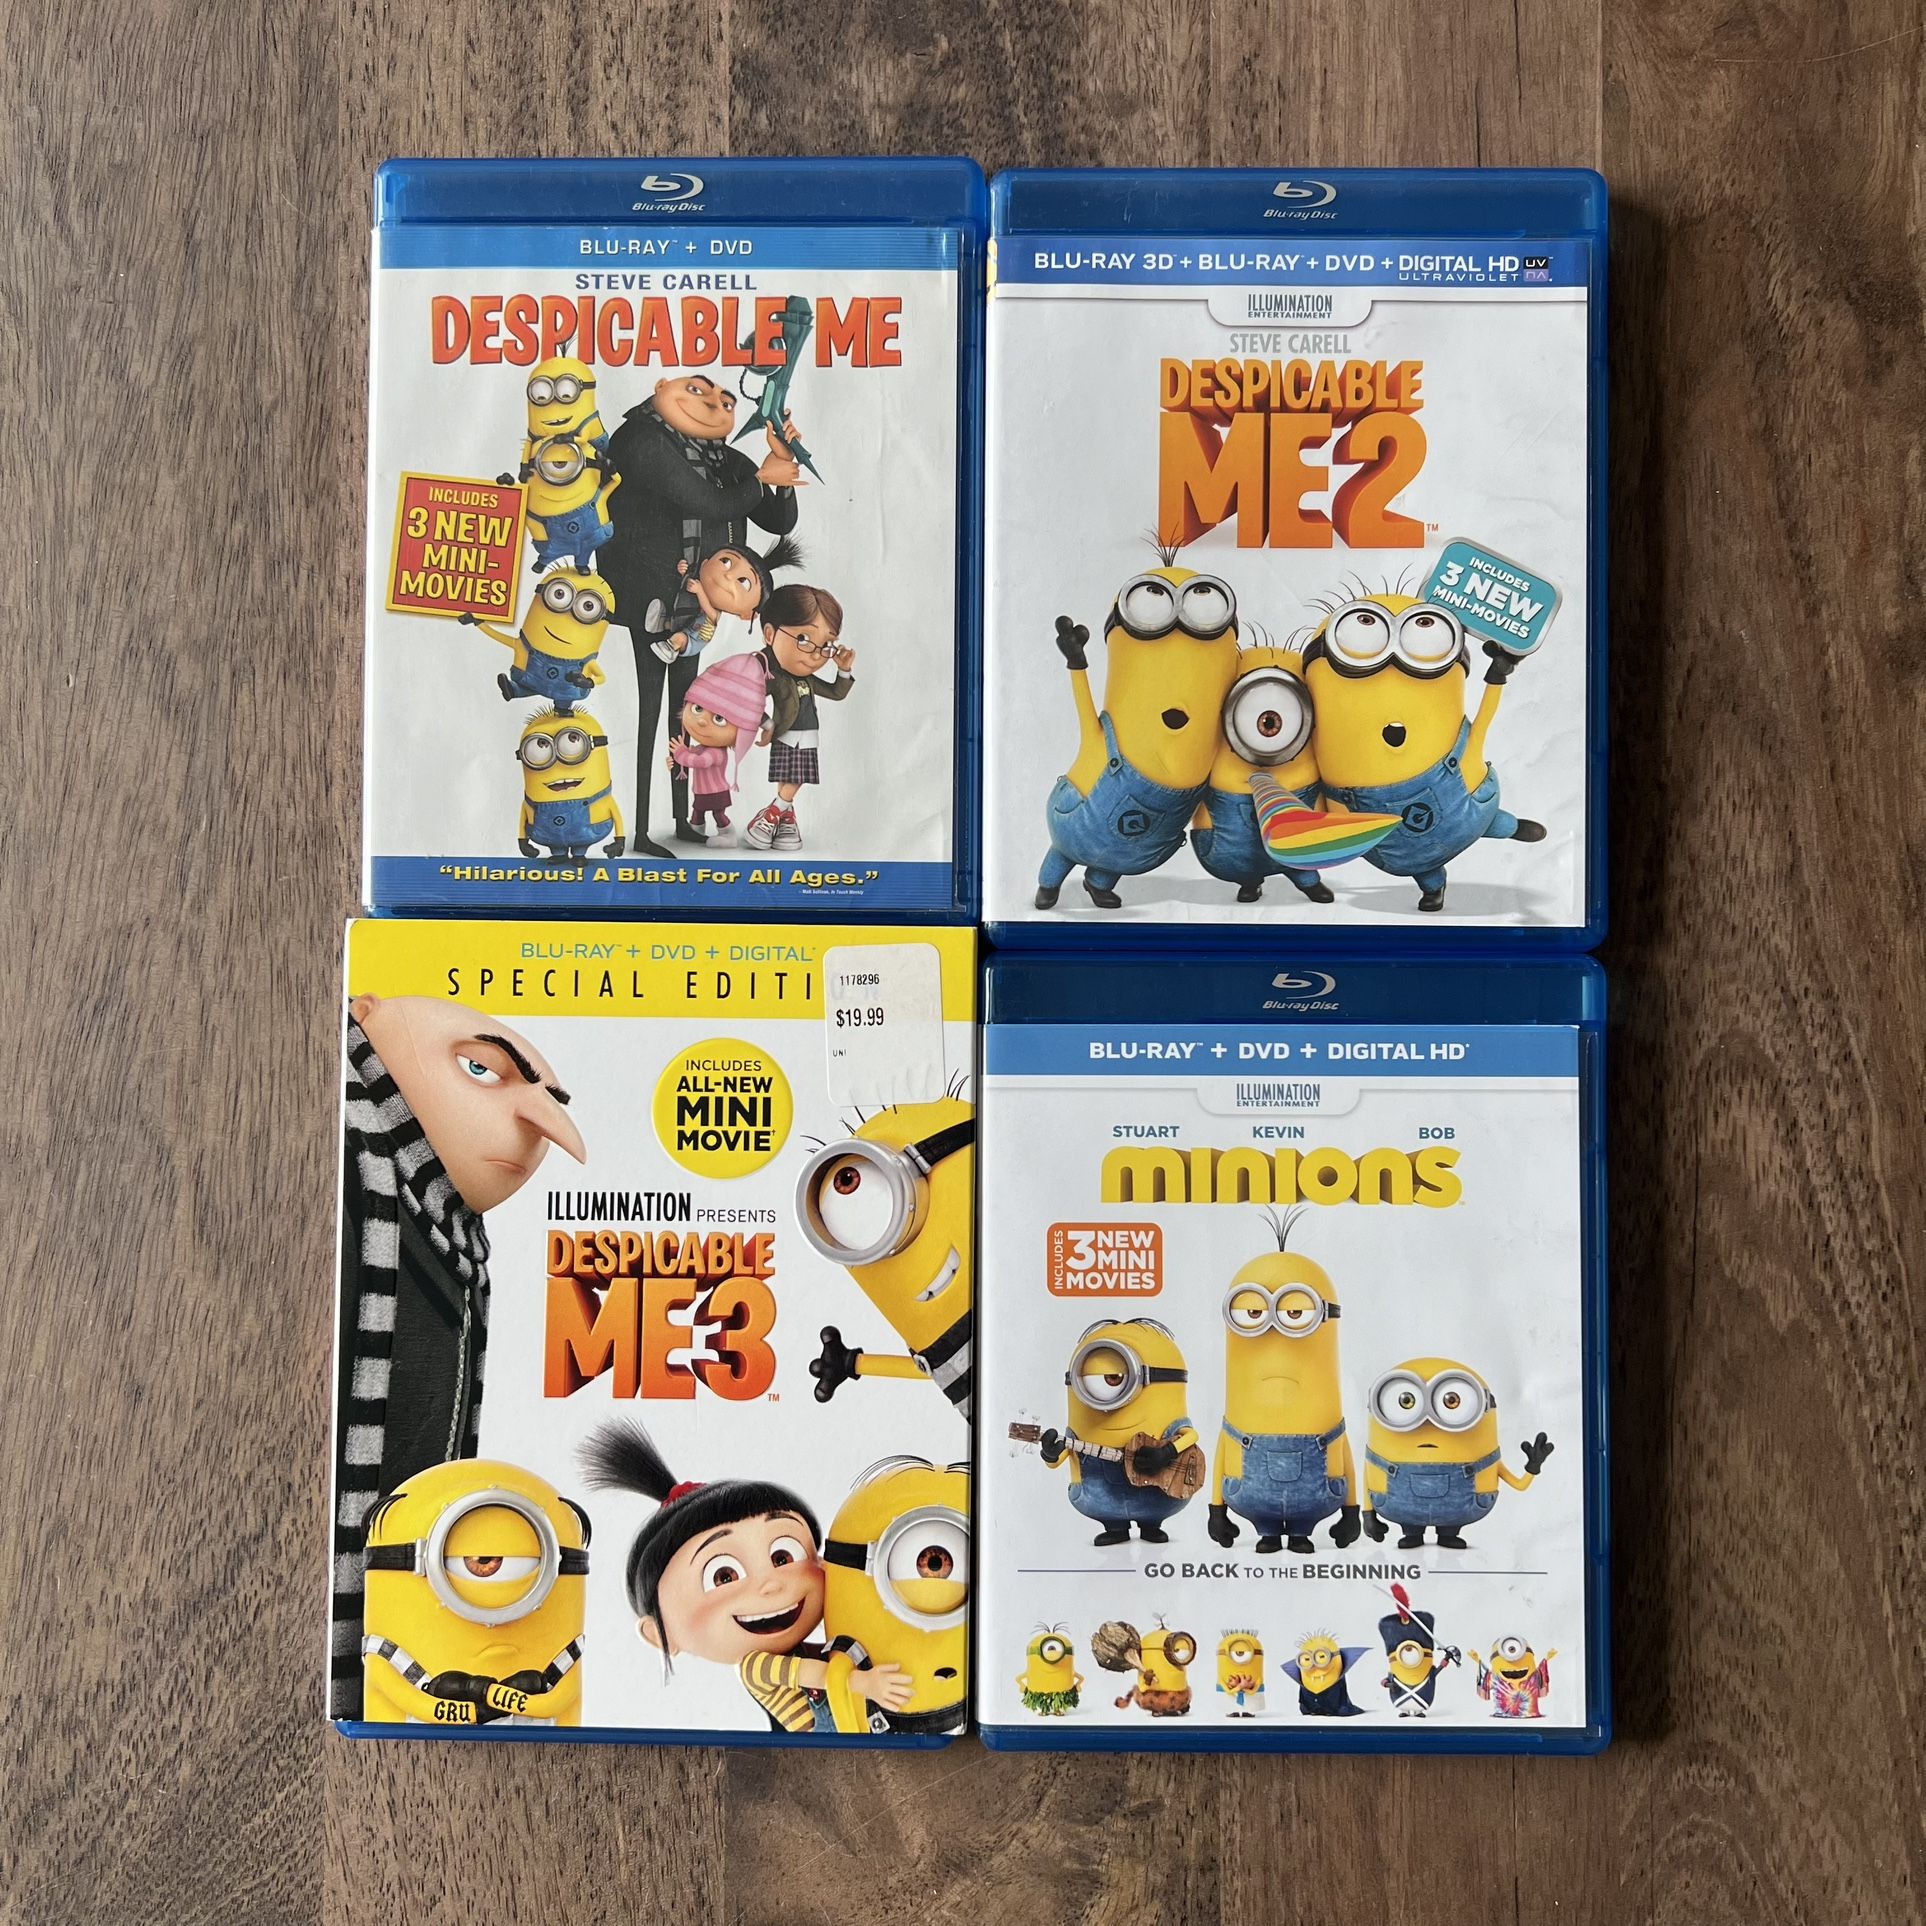 Dreamworks Animation Despicable Me 1, 2, 3 & Minions Kid’s Blu-Ray & DVD Movies